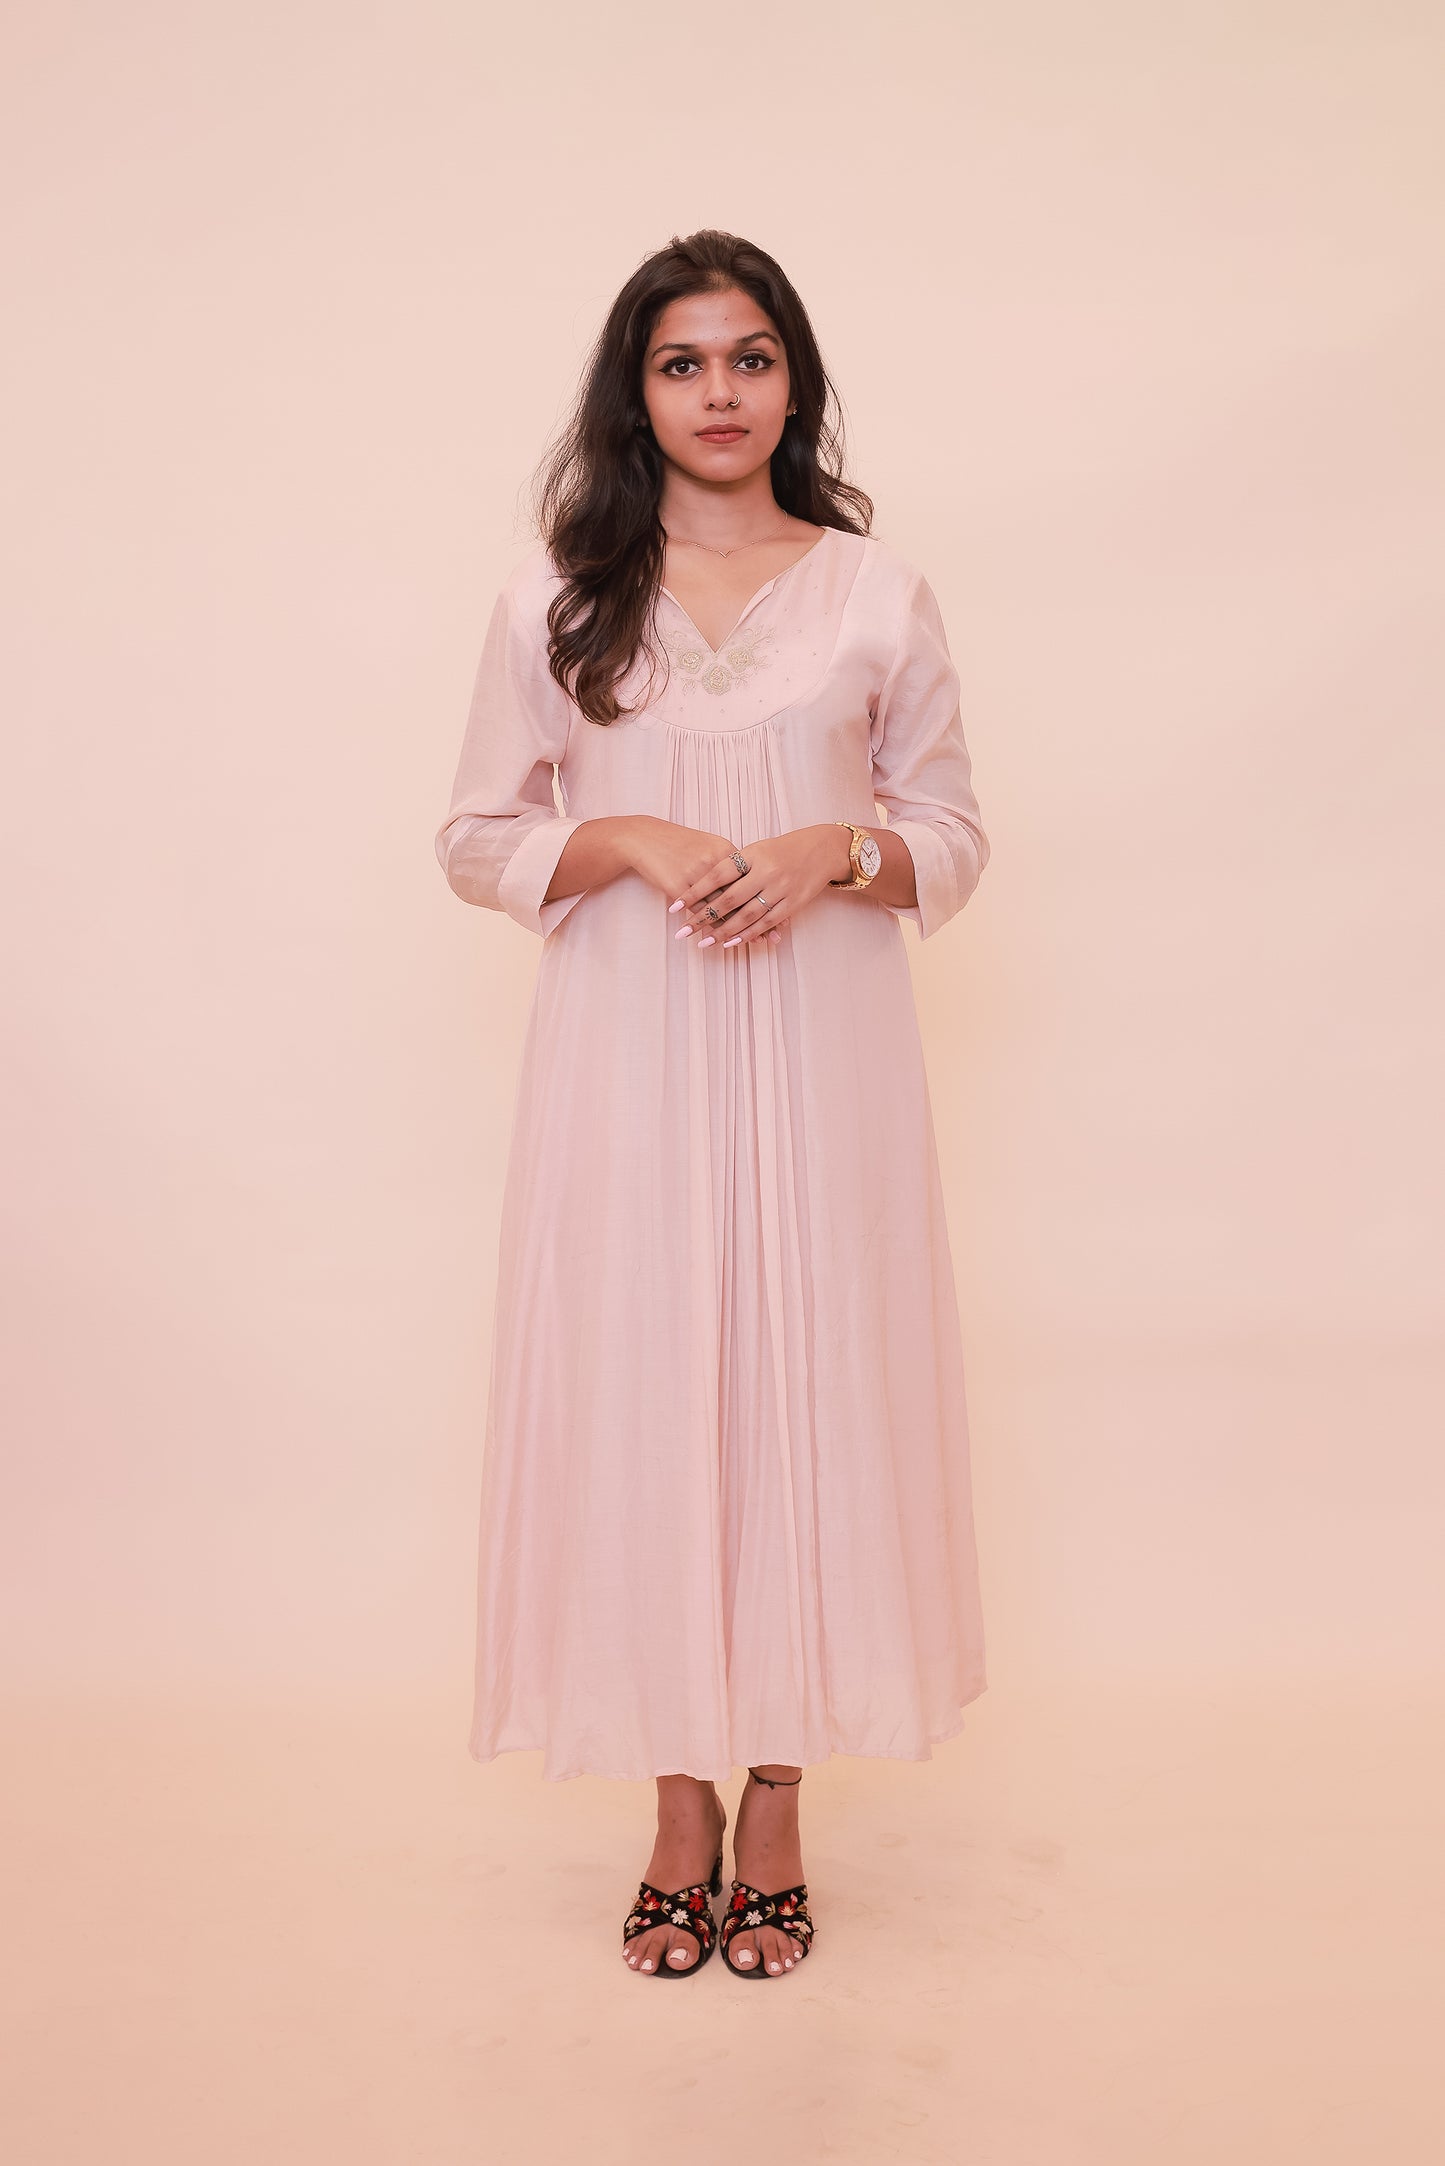 Light pastel pink with gold thread embroidery on yoke